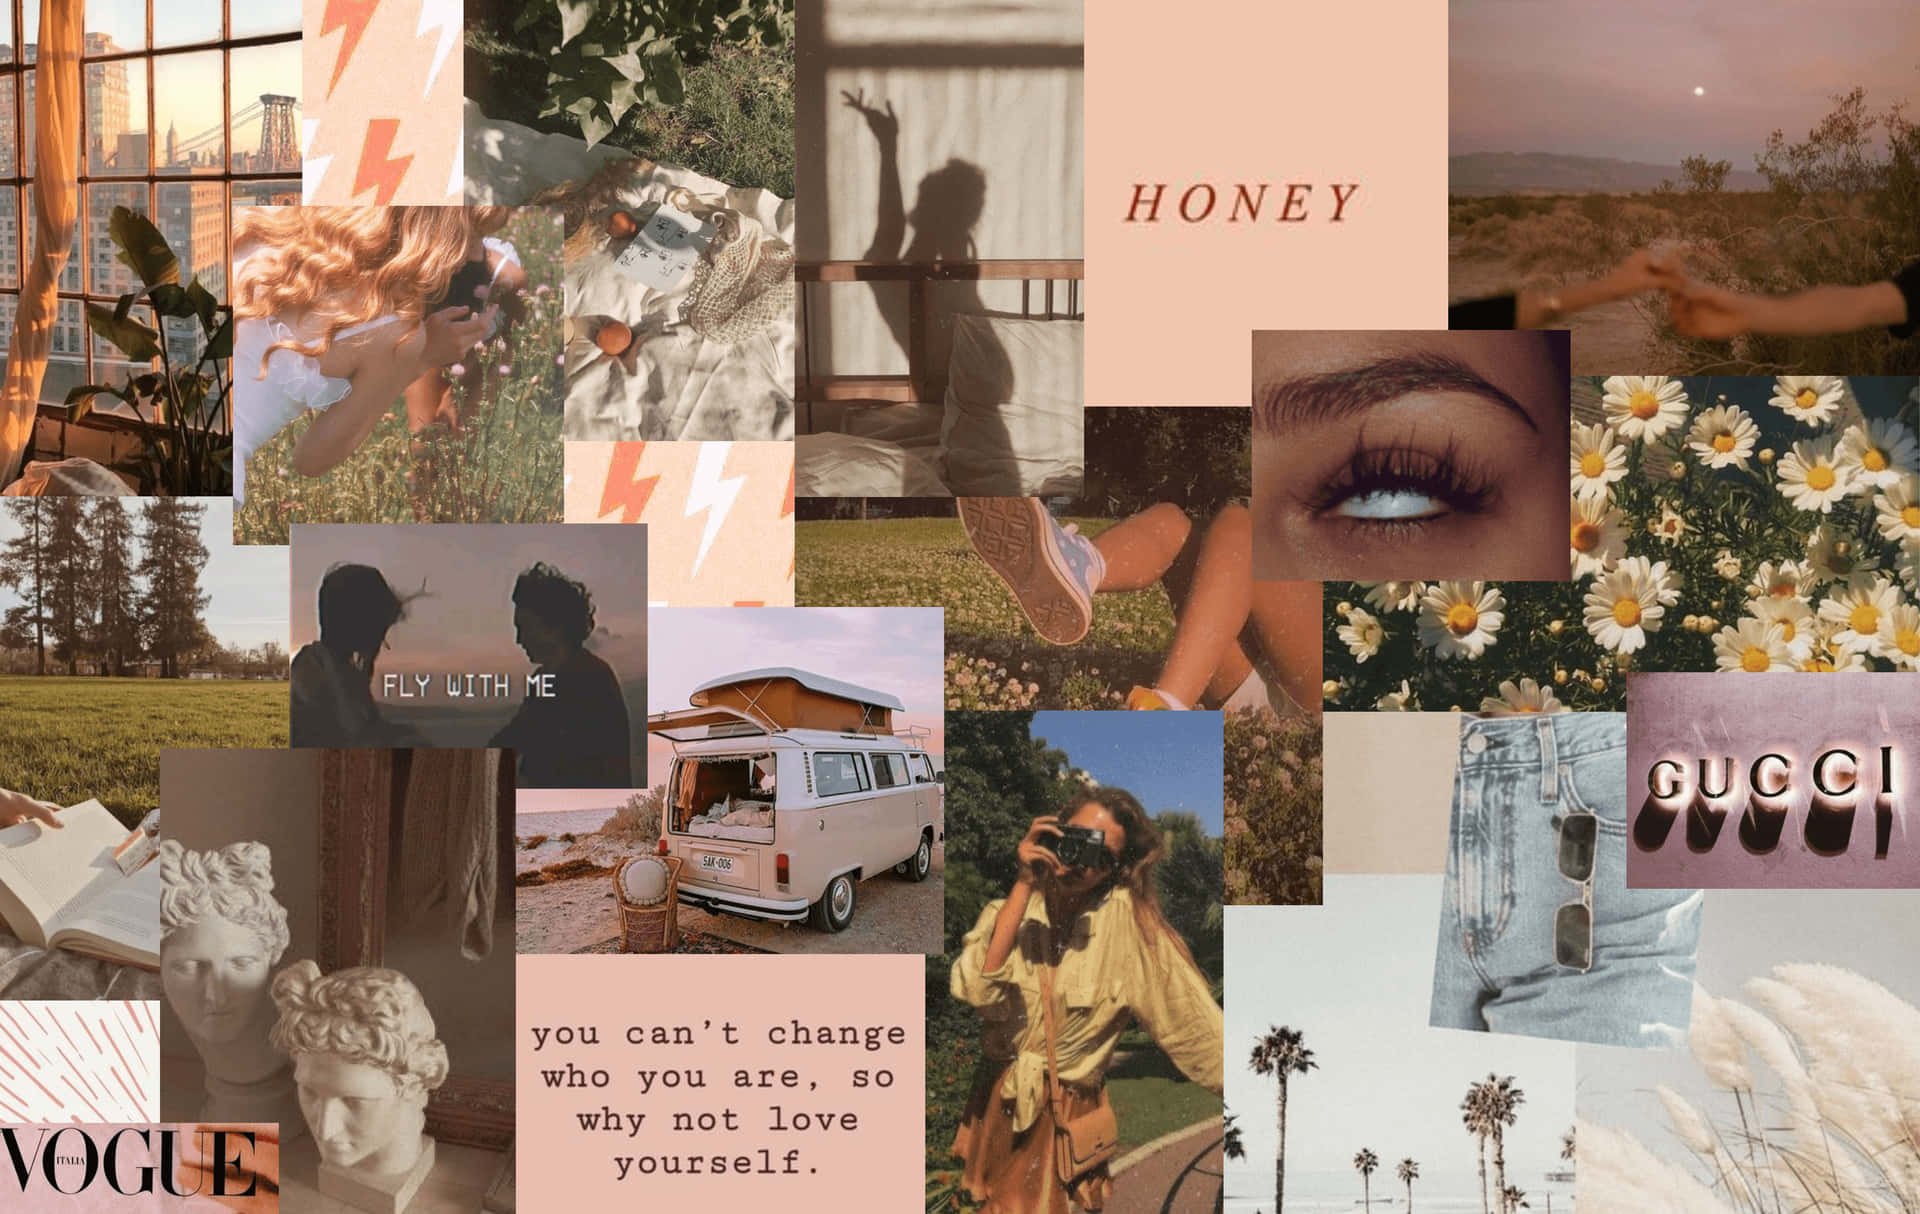 A collage of photos including a van, flowers, a girl taking a photo, and a girl with her eyes closed. - Collage